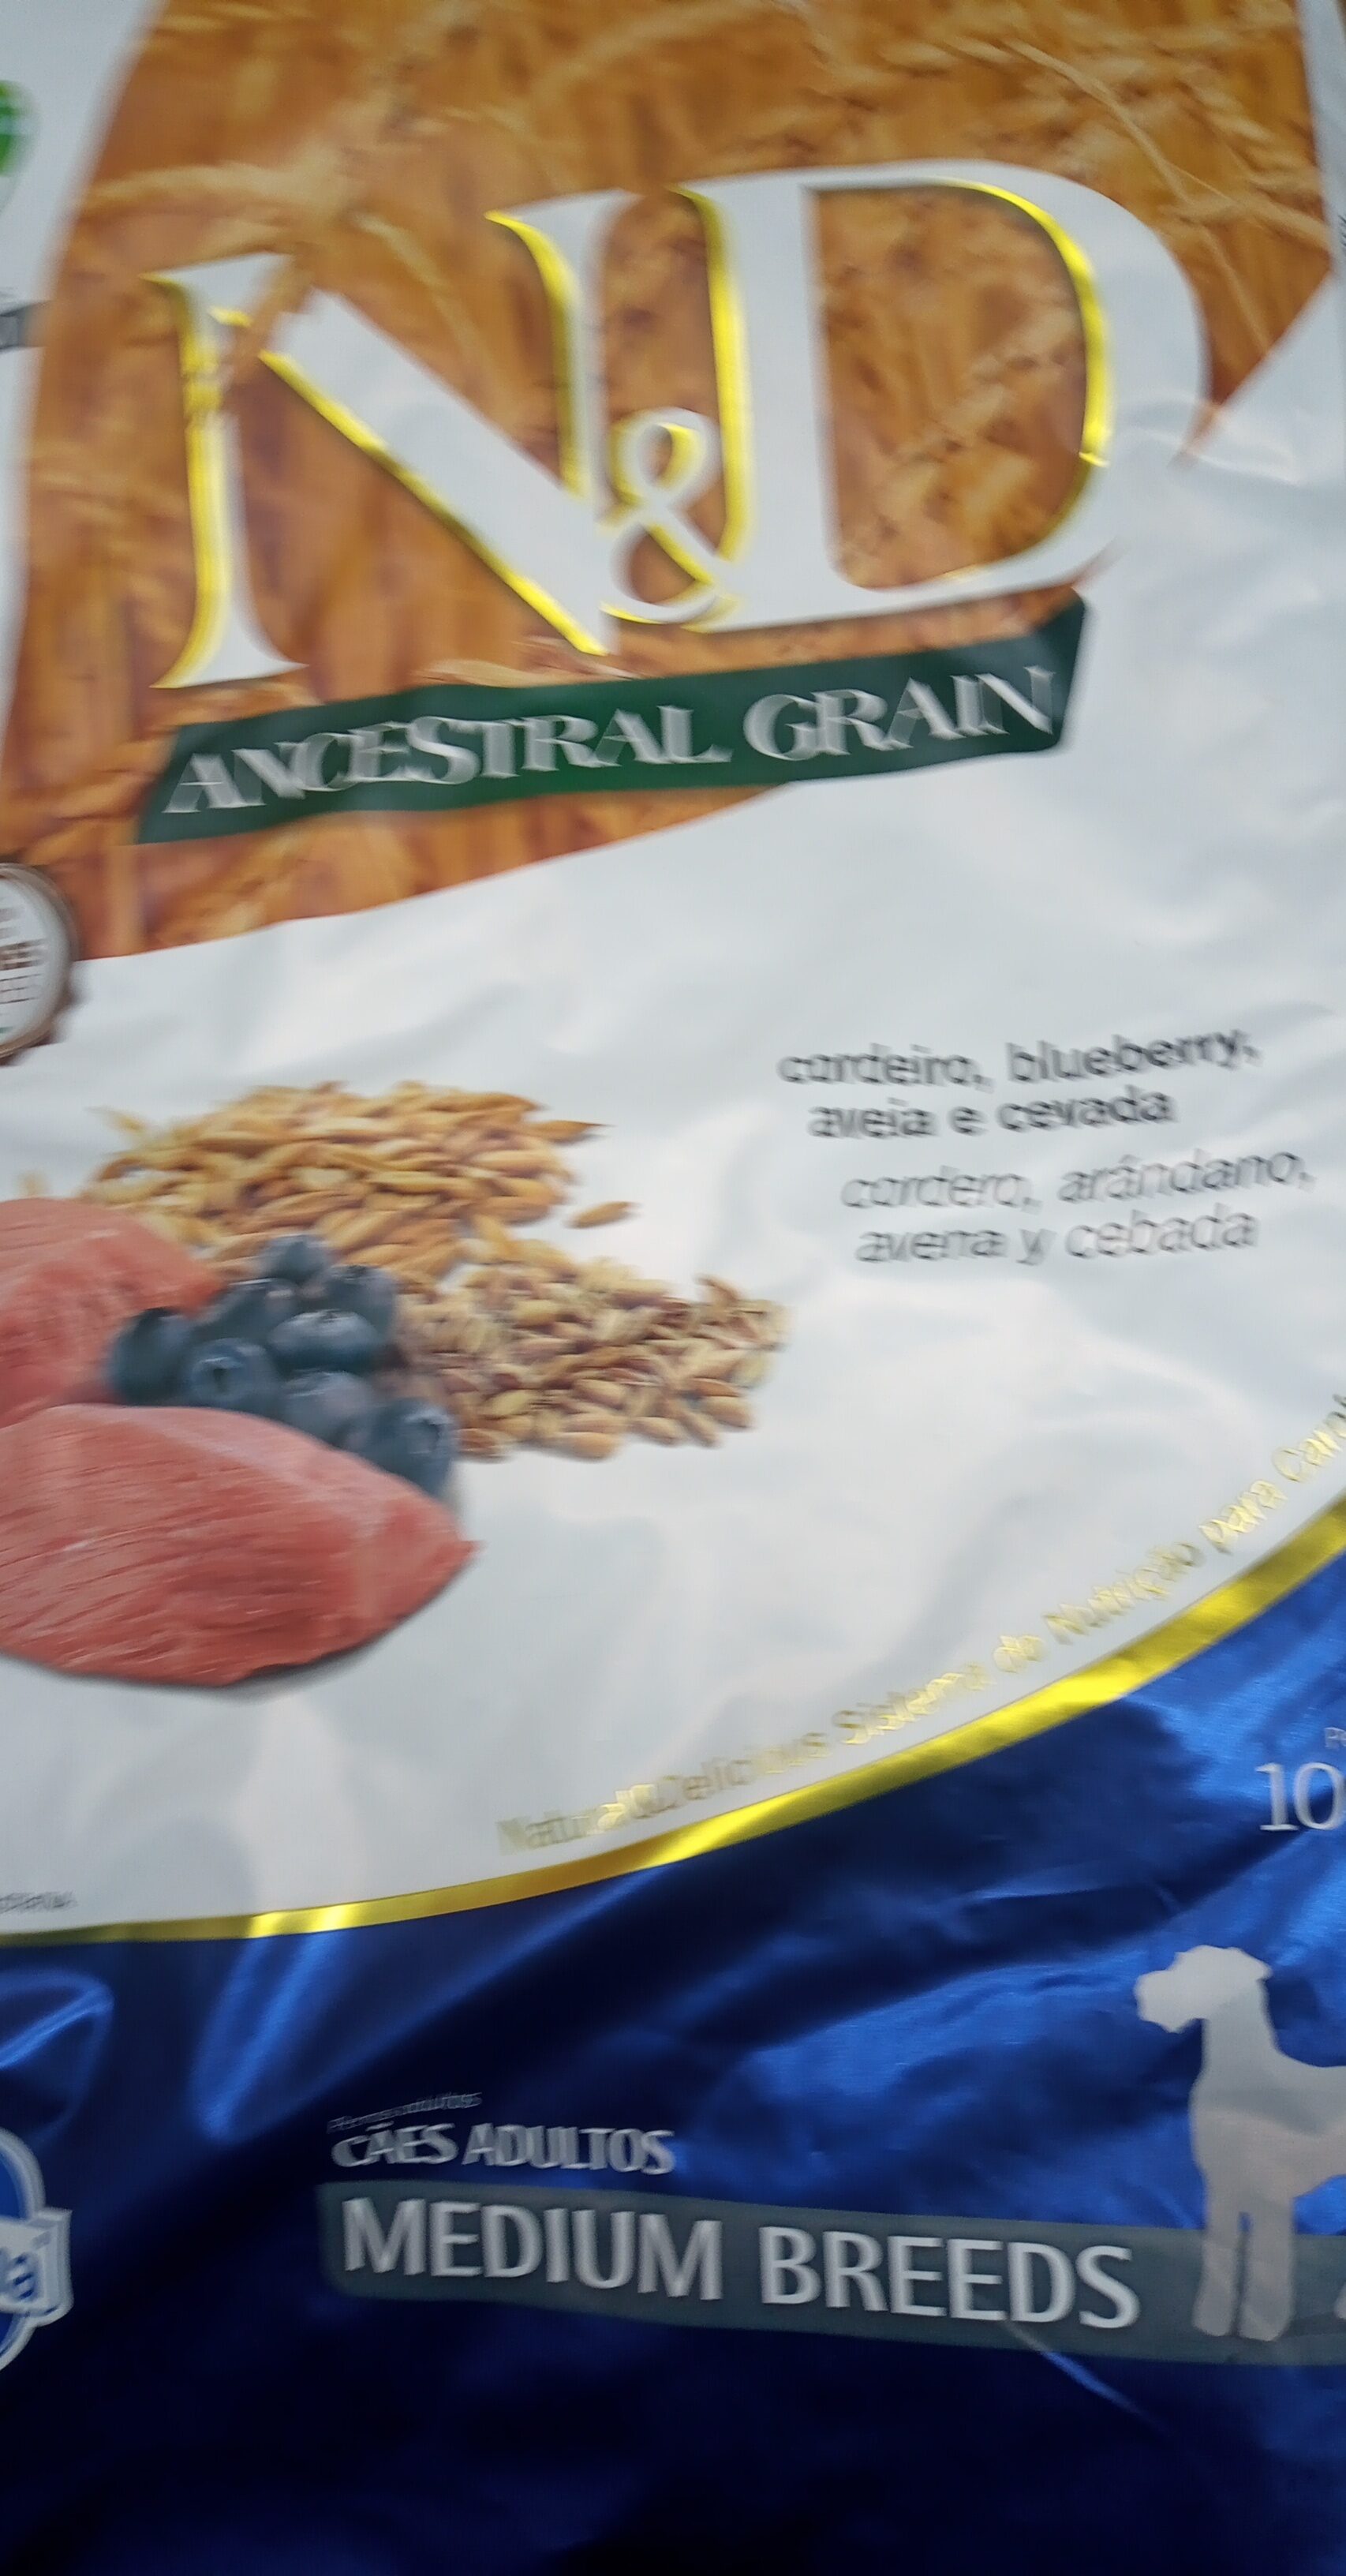 ND ancestral grain - Product - pt